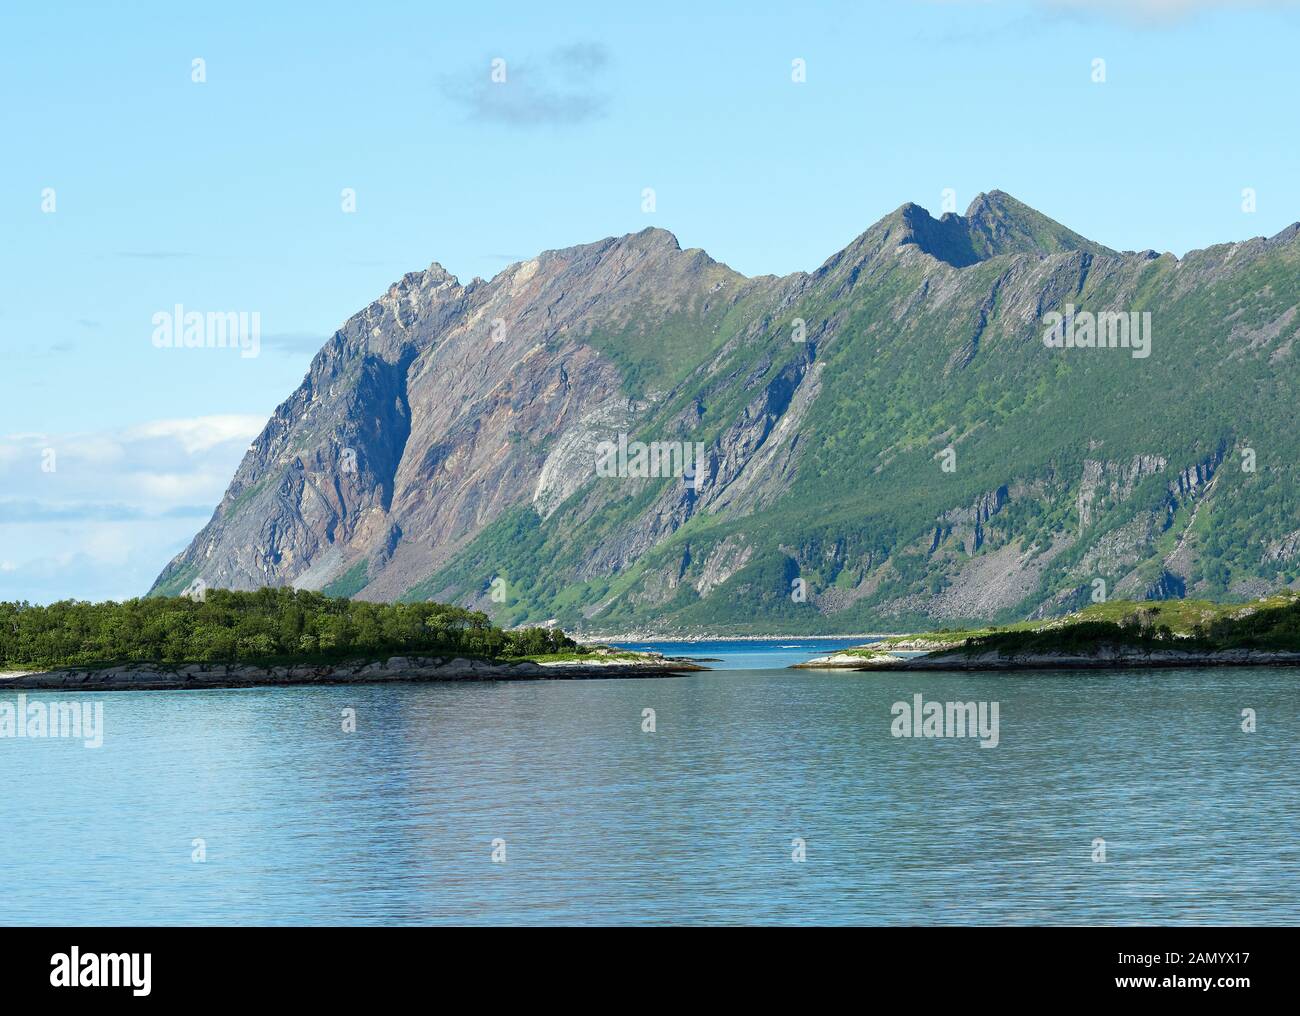 Scenic mountain view in mountainous summer terrain in northern Norway. Senja Island, Troms County - Norway. Beauty of nature concept background. Stock Photo